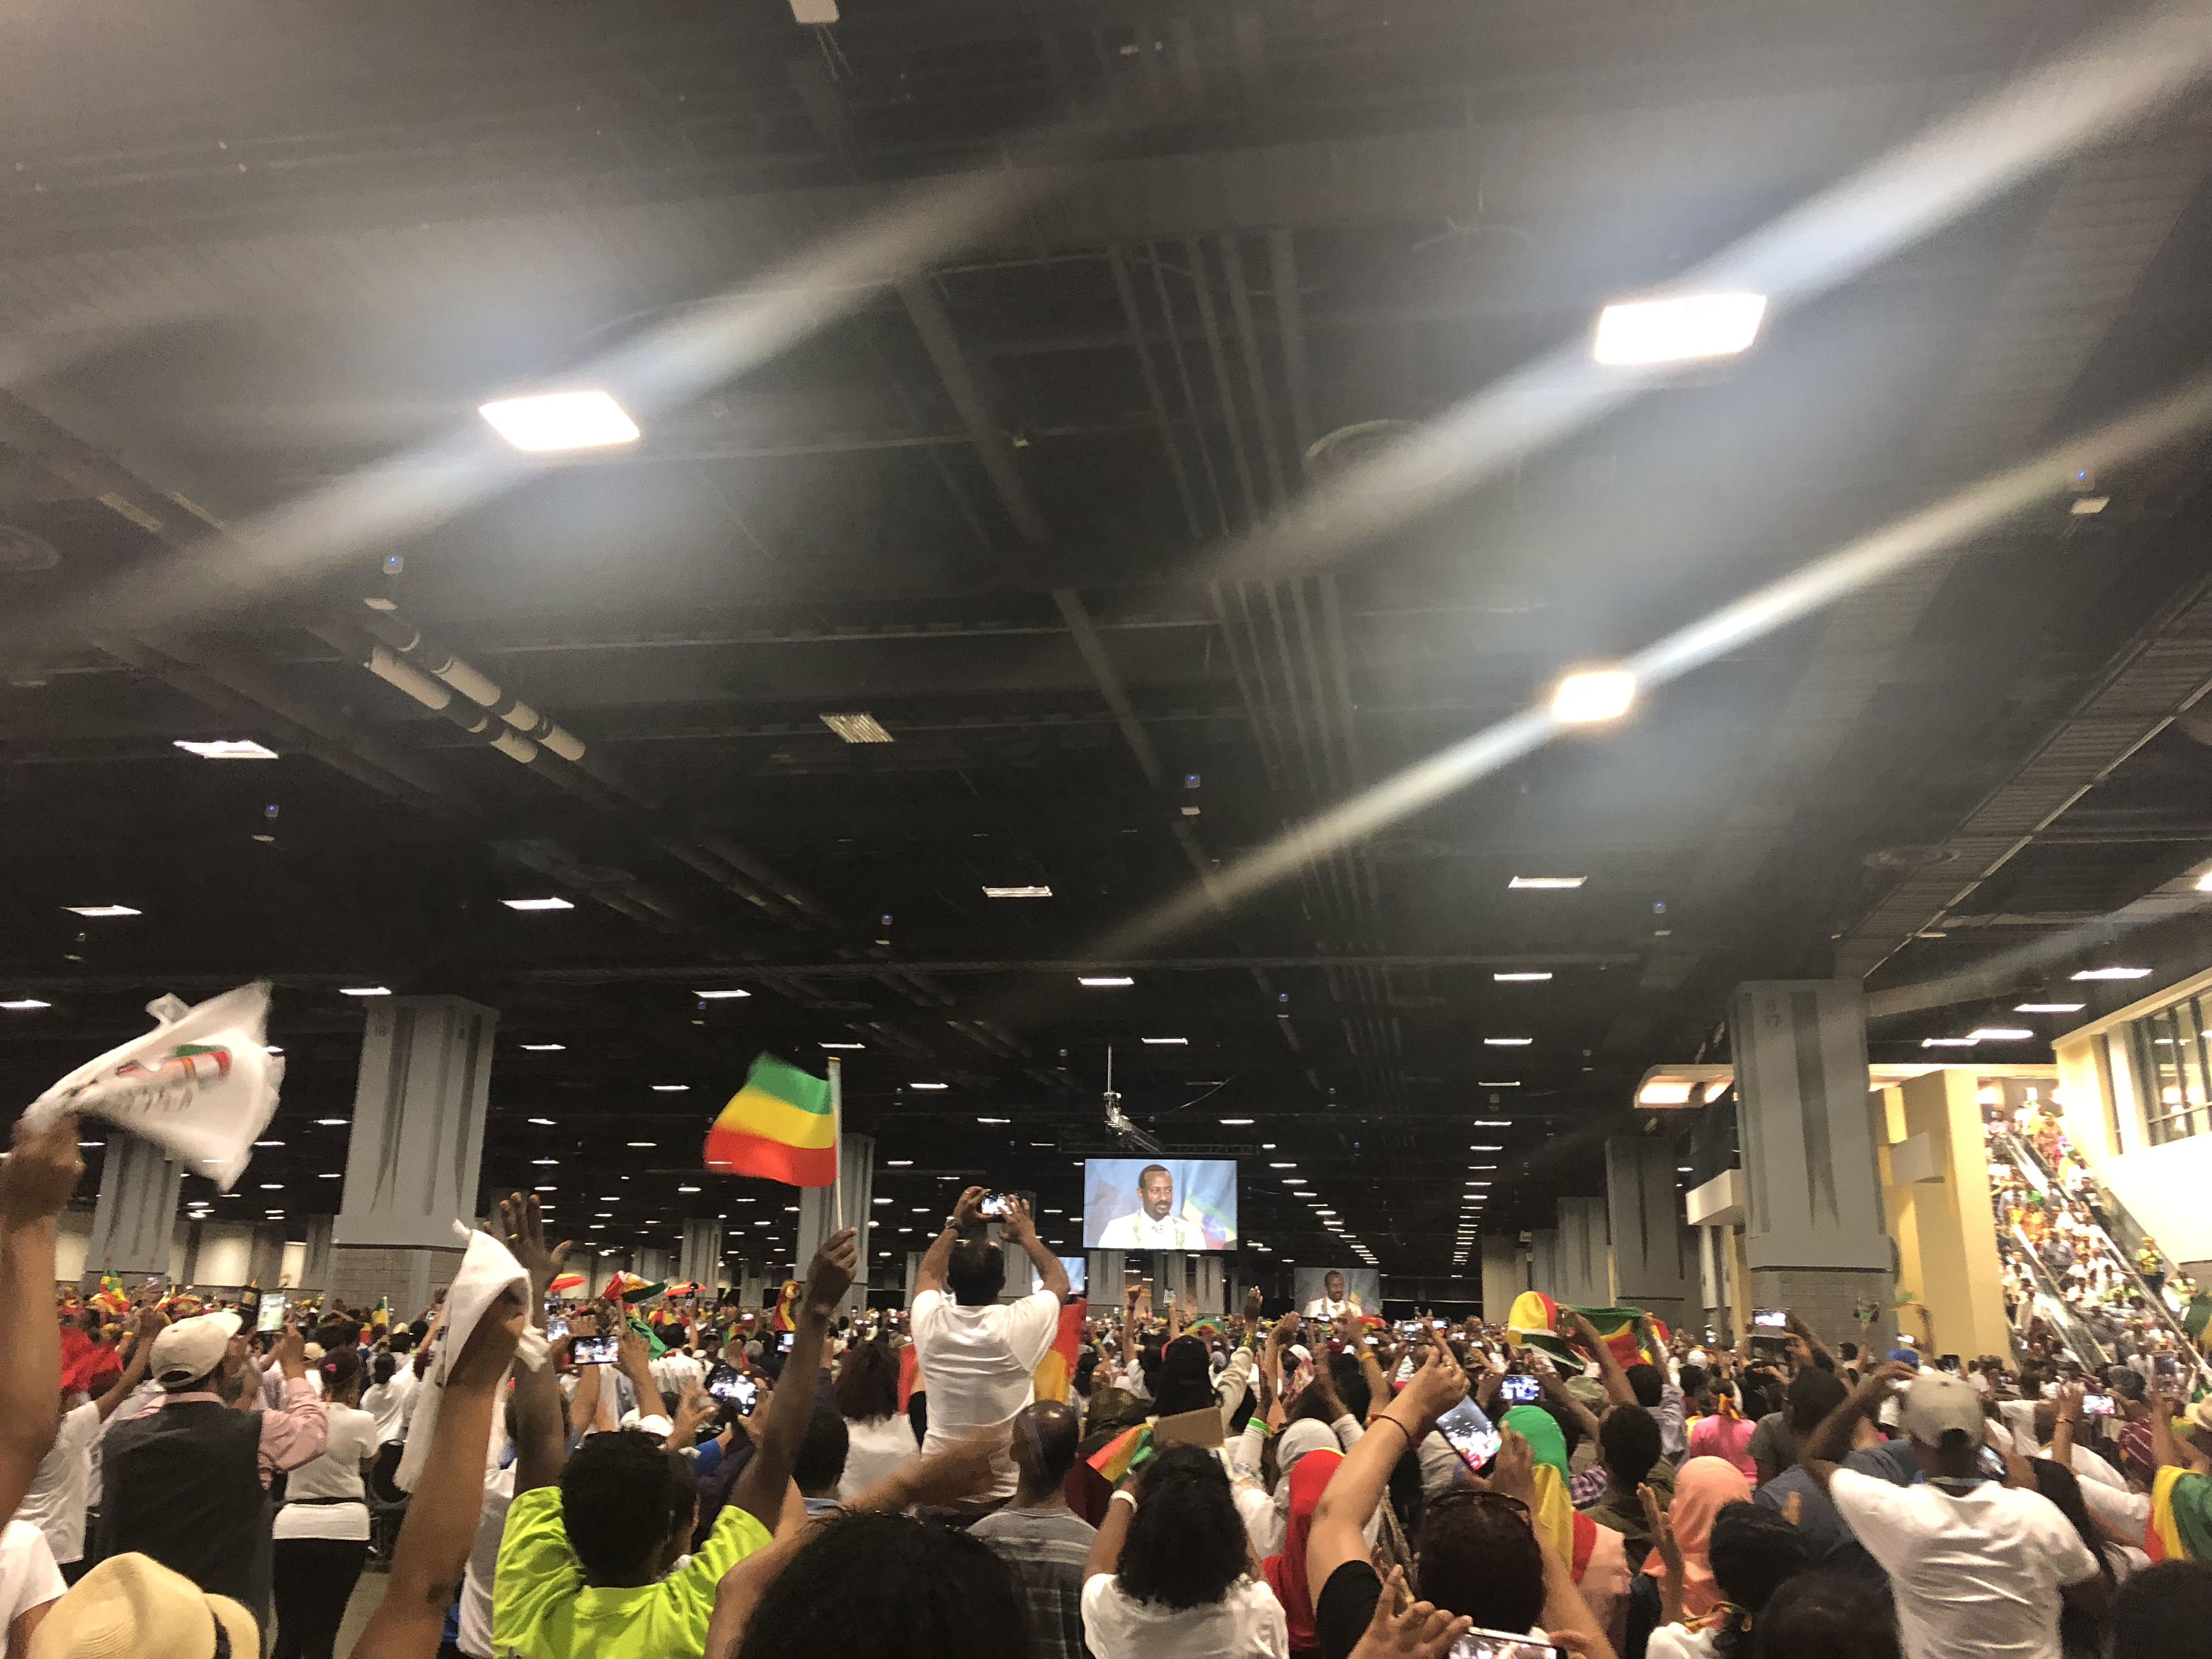 That afternoon, a lucky fraction of the crowd who had been waiting since the early hours of the morning would make it into the room where Abiy would give his speech. Others were packed into rooms with large TVs to watch his speech live. Image by Claire Potter. Unites States, 2018. 